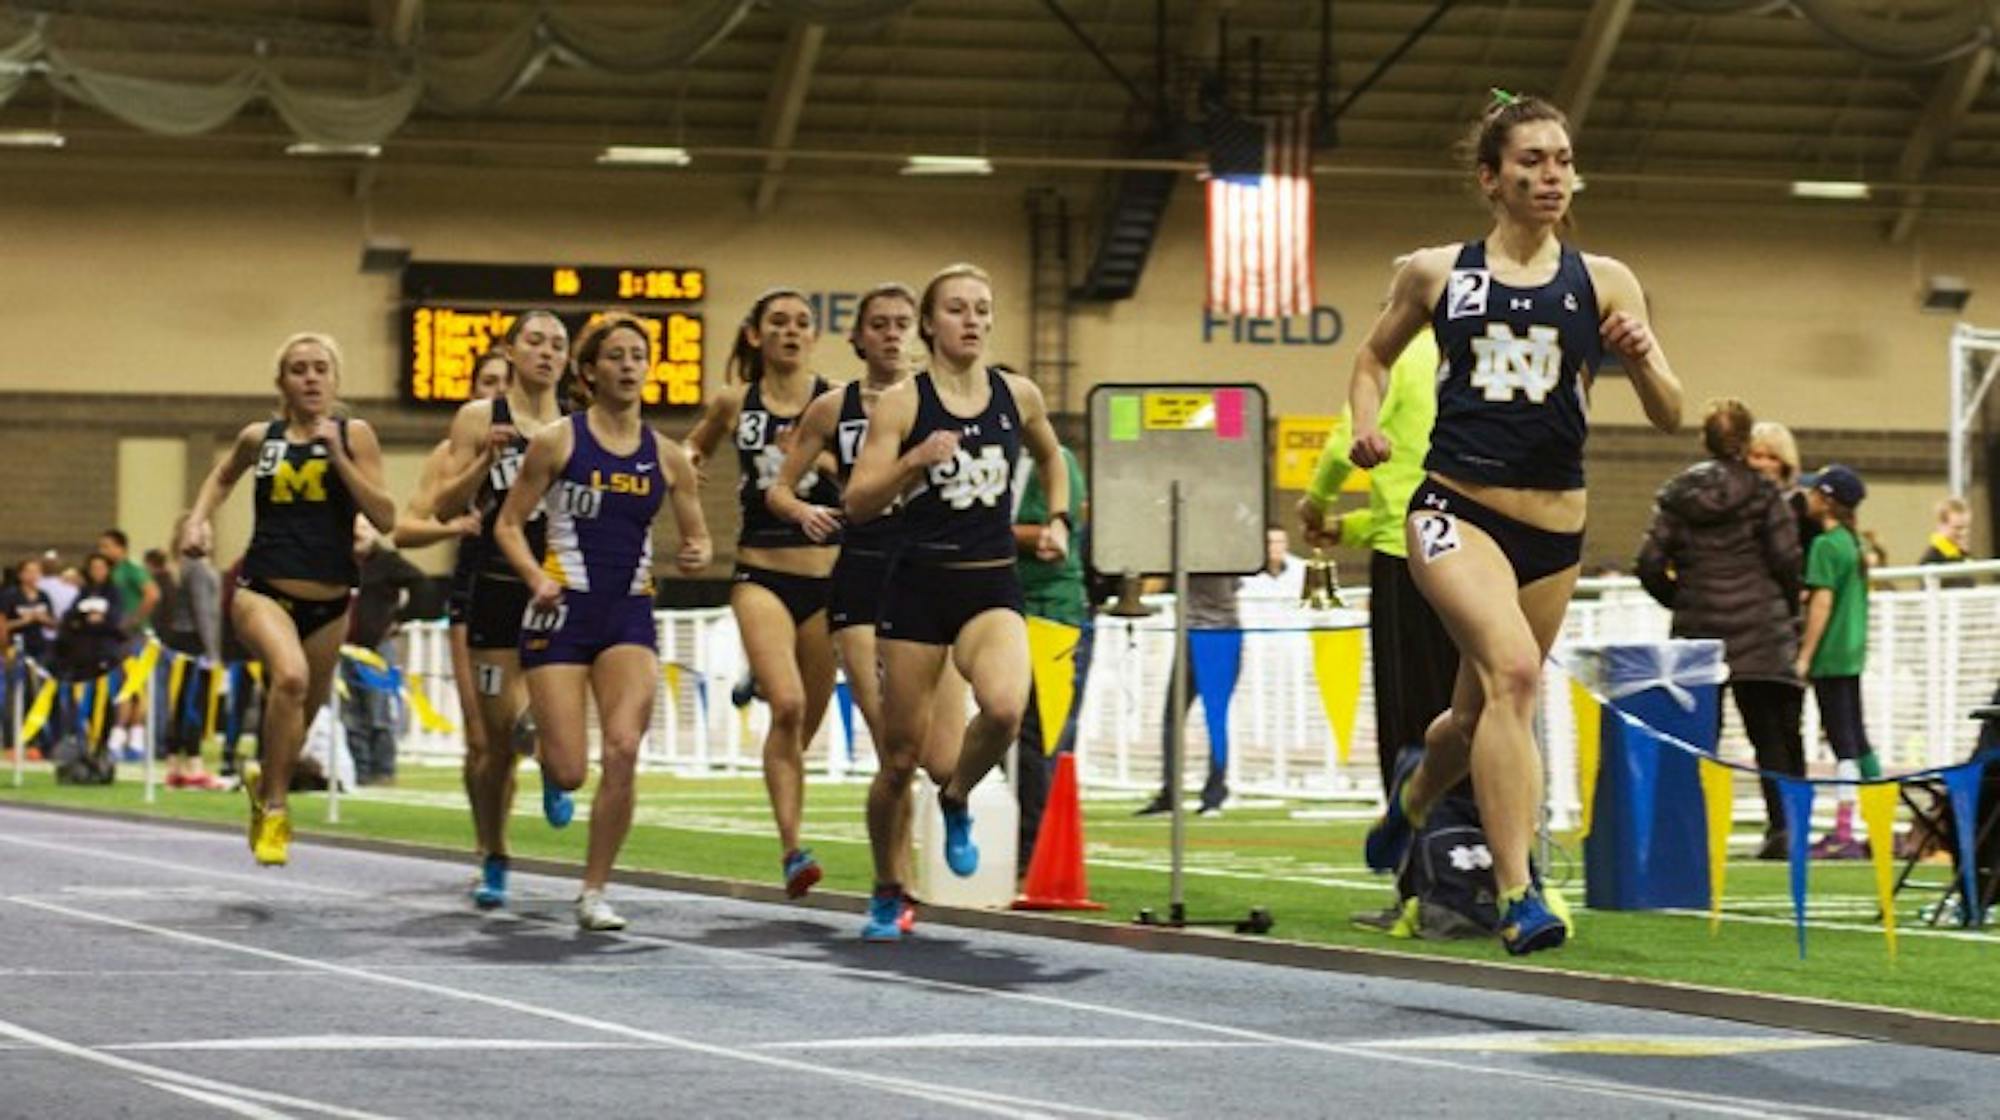 Irish sophomore Jessica Harris, far right, leads a pack of runners during the 800-meter run Saturday. Harris was a part of the distance medley relay  team that posted a qualifying time for nationals at the meet.